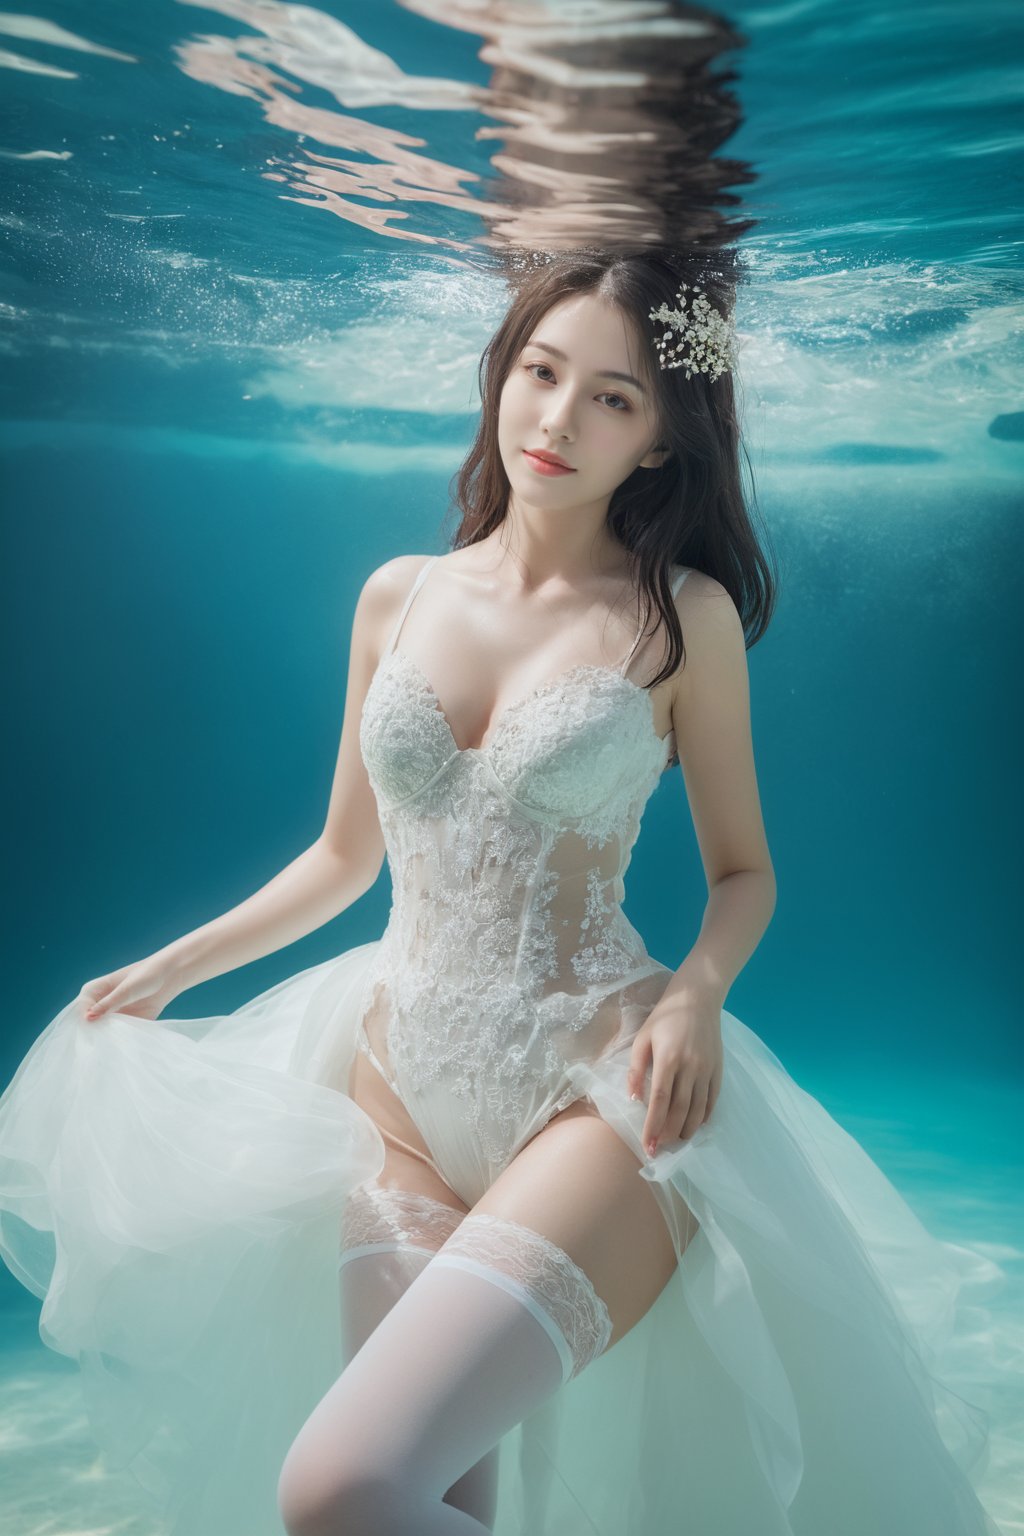 photorealistic,portrait of hubggirl, 
(ultra realistic,best quality),photorealistic,Extremely Realistic, in depth, cinematic light,

a beautiful girl wear wedding_dress,((white stockings)),smile,
full body,underwater, Floating hair,swimming,bent_over,Floating in water, bubbles, foam,

perfect hands, perfect lighting, vibrant colors, intricate details, high detailed skin, pale skin, intricate background, taken by Canon EOS,SIGMA Art Lens 35mm F1.4,ISO 200 Shutter Speed 2000,Vivid picture,